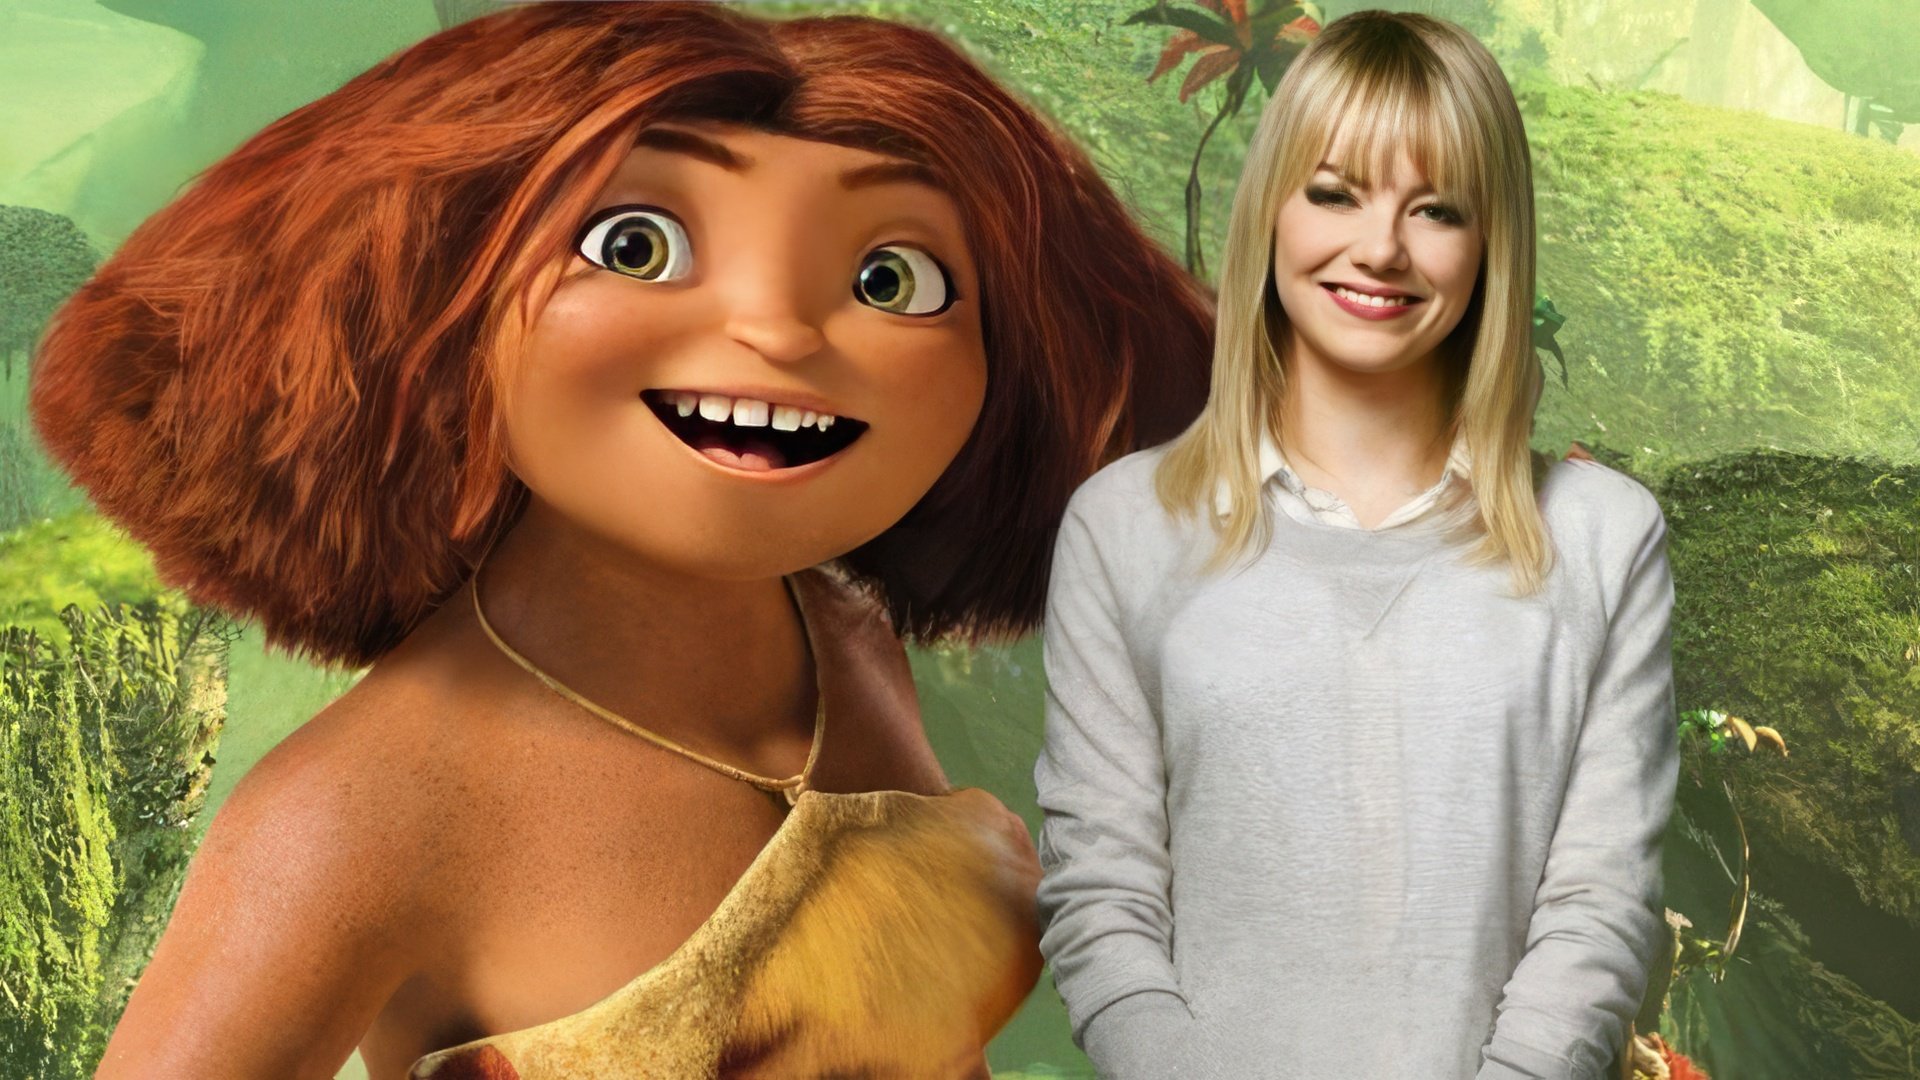 Emma Stone at “The Croods” premiere